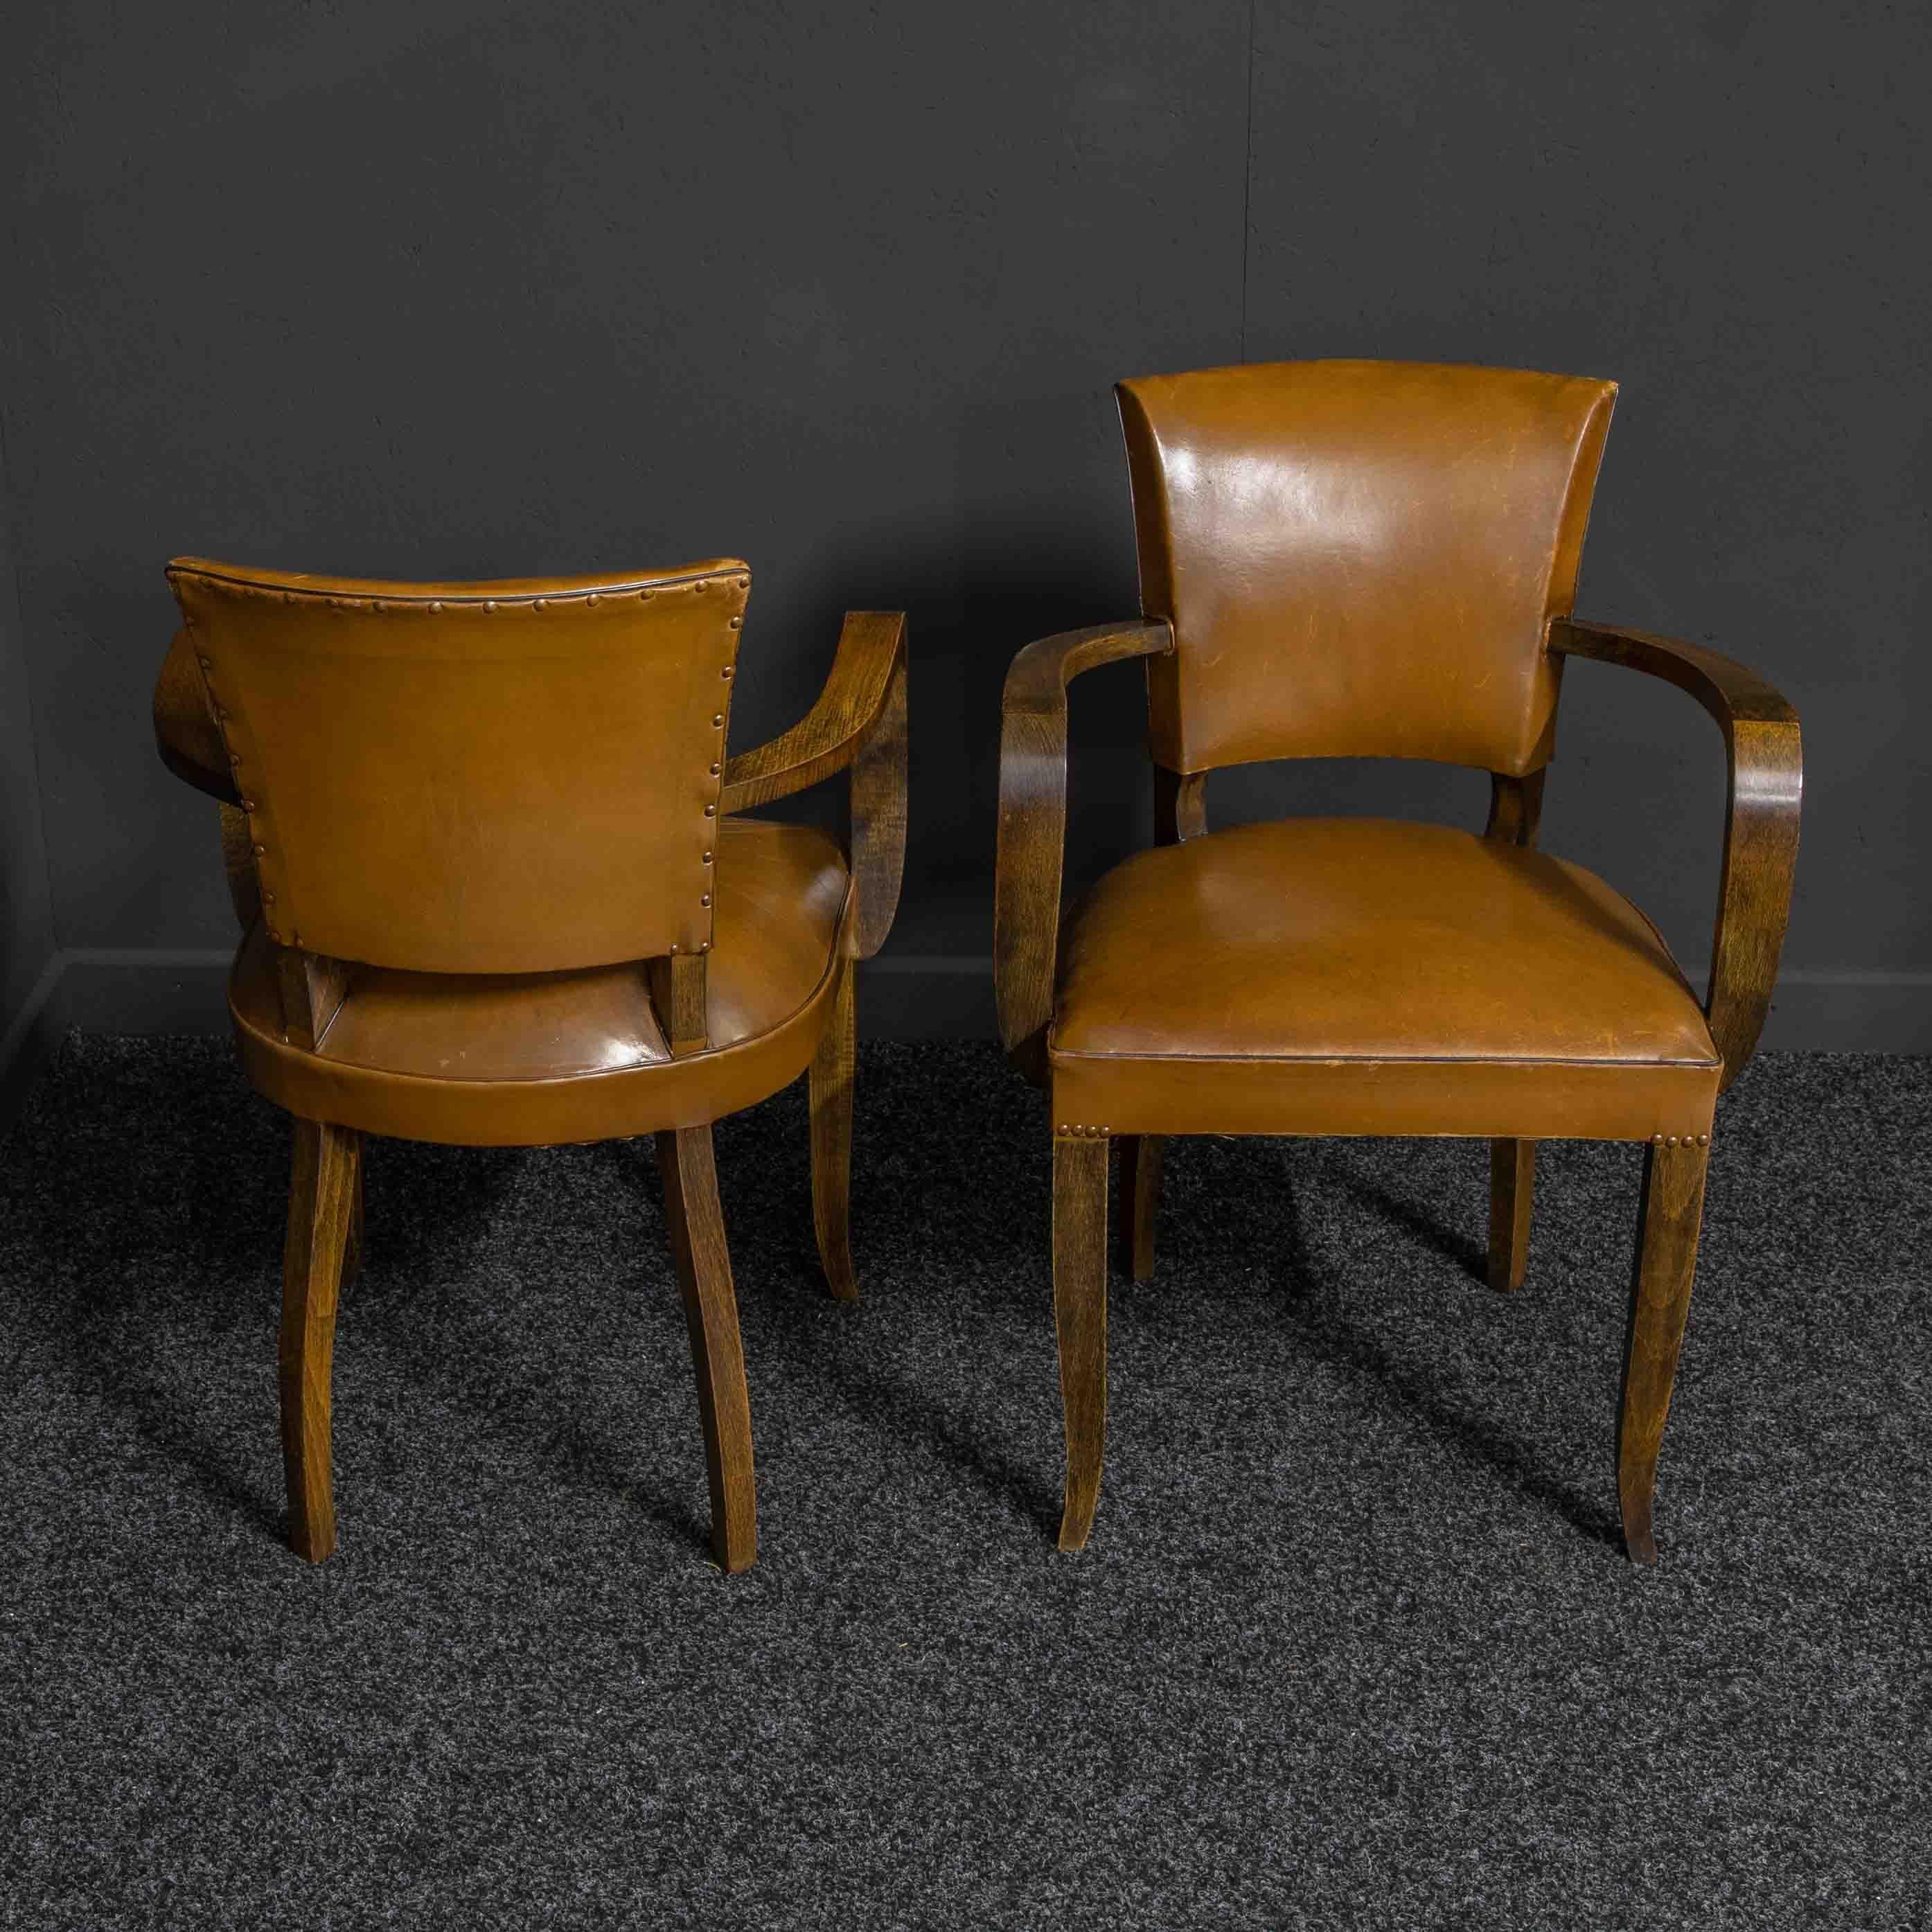 Mid-20th Century Pair of Art Deco Chairs by OXEDOU